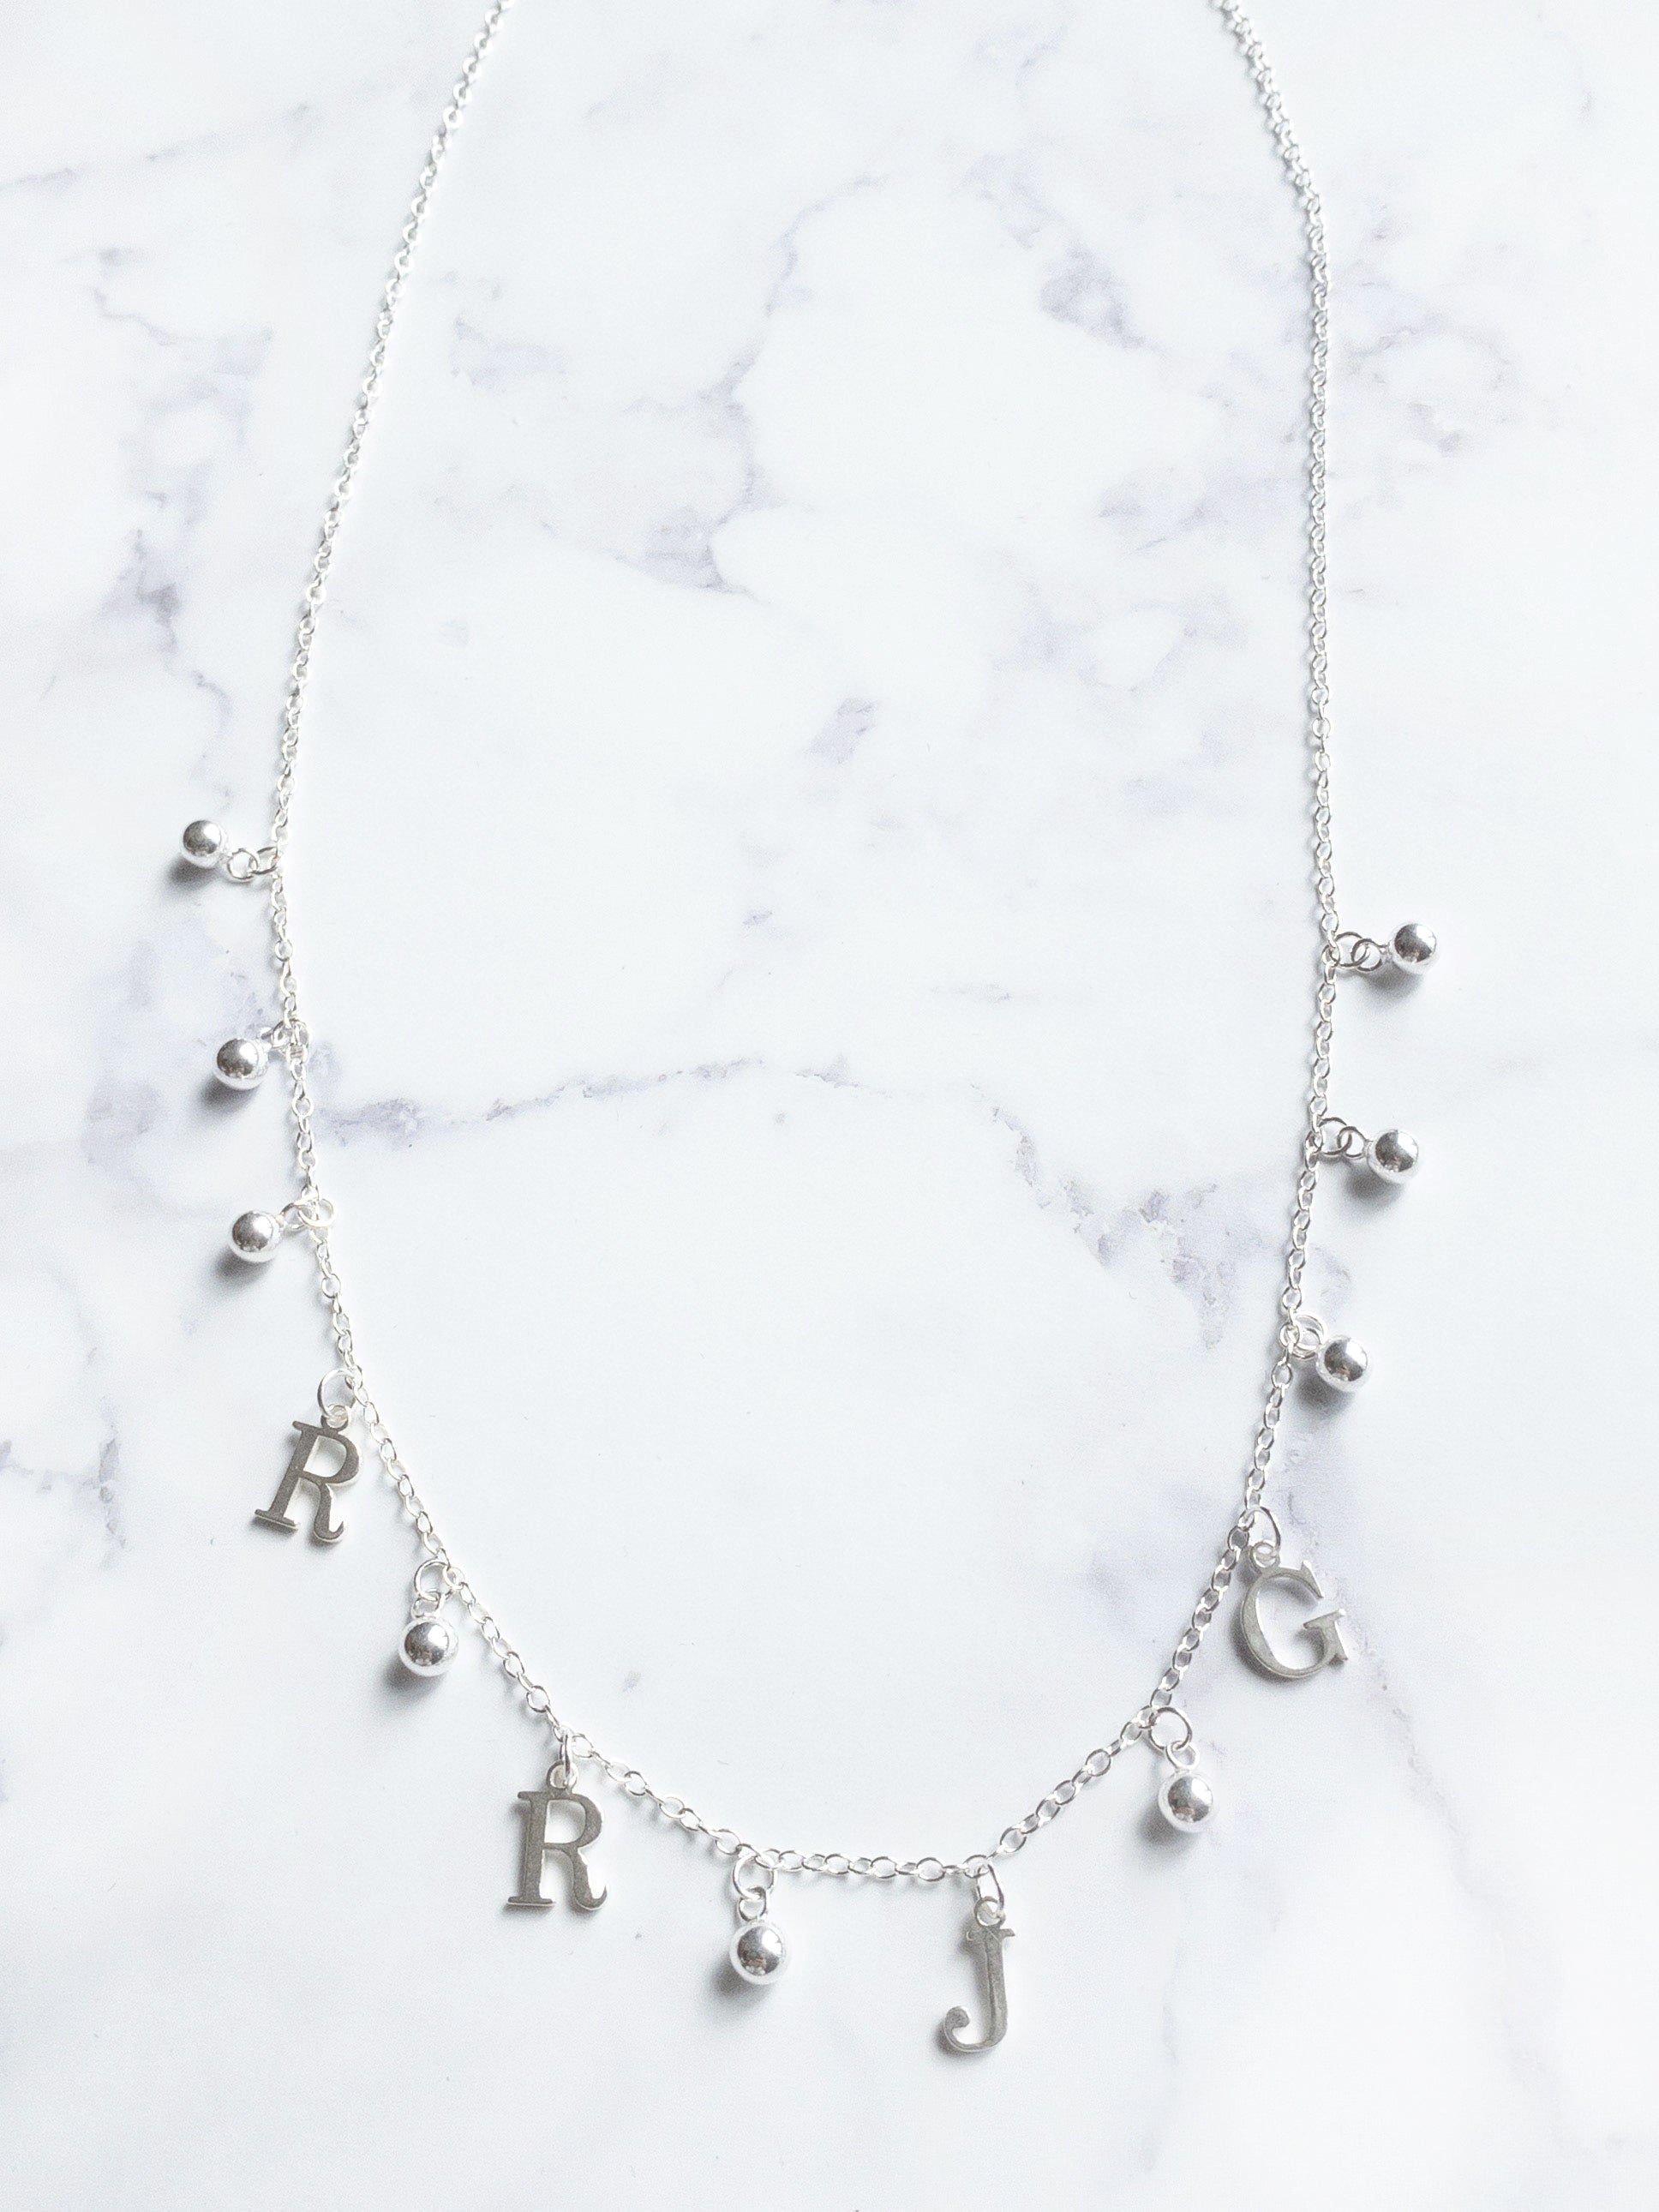 Personalised Silver Multiple Beaded Charm Necklace